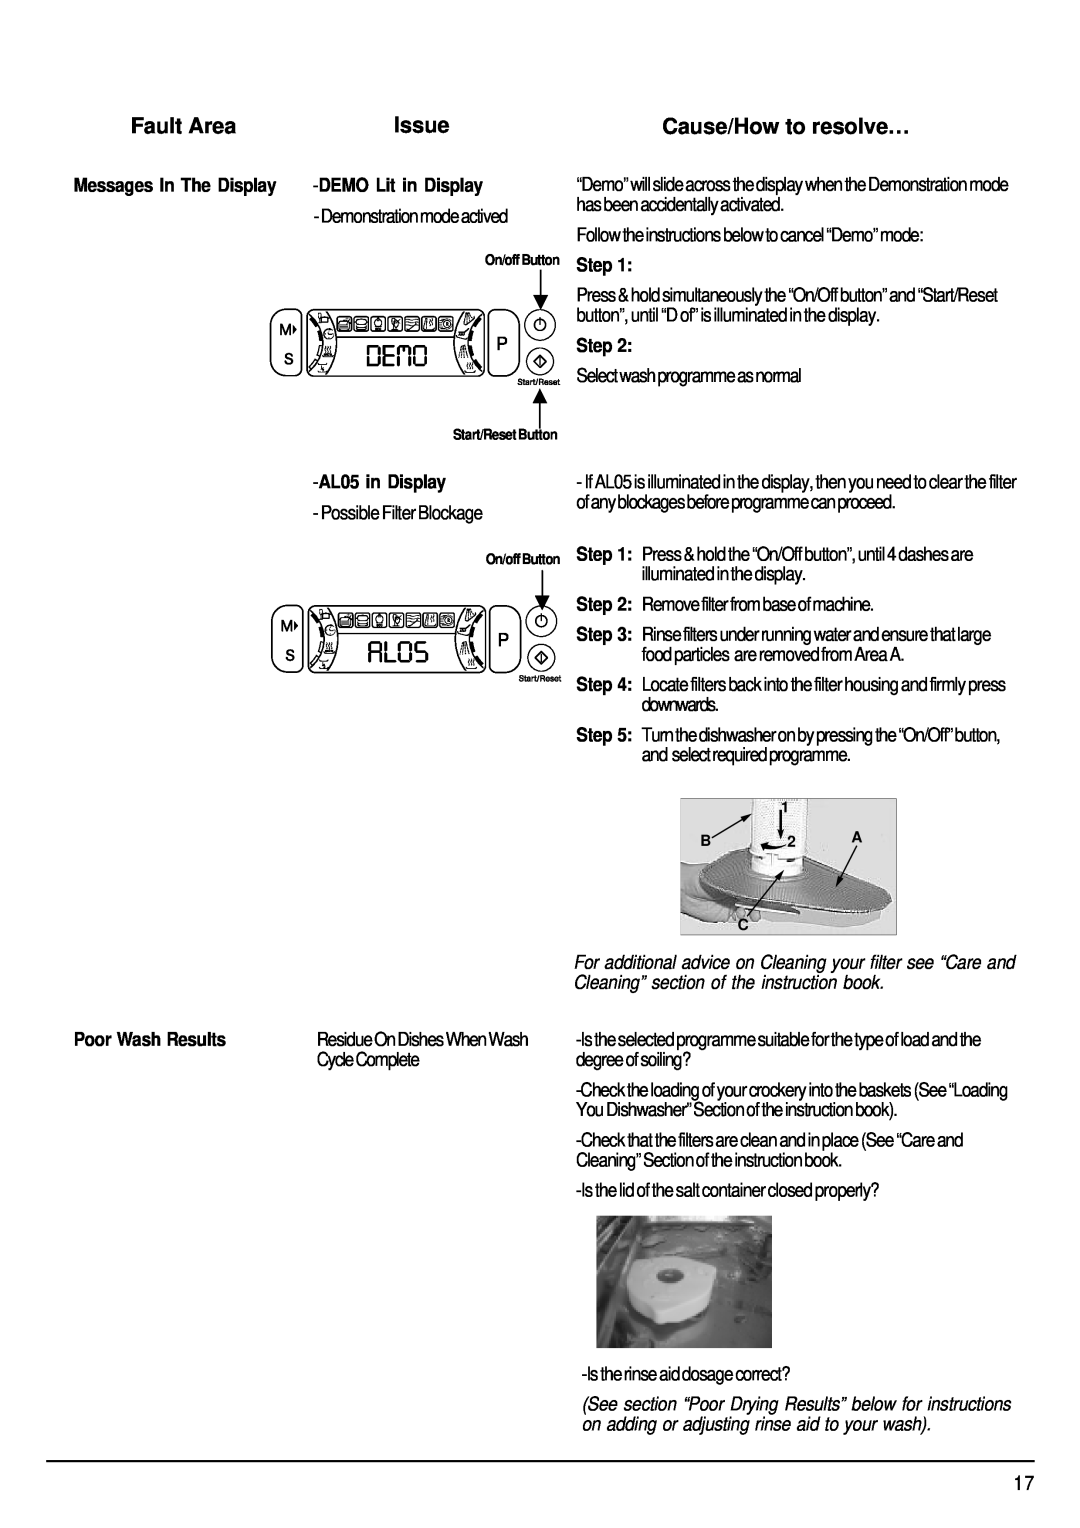 Hotpoint FDW85 Fault Area, Issue, Cause/How to resolve…, Messages In The Display, DEMOLit in Display, Step, AL05in Display 